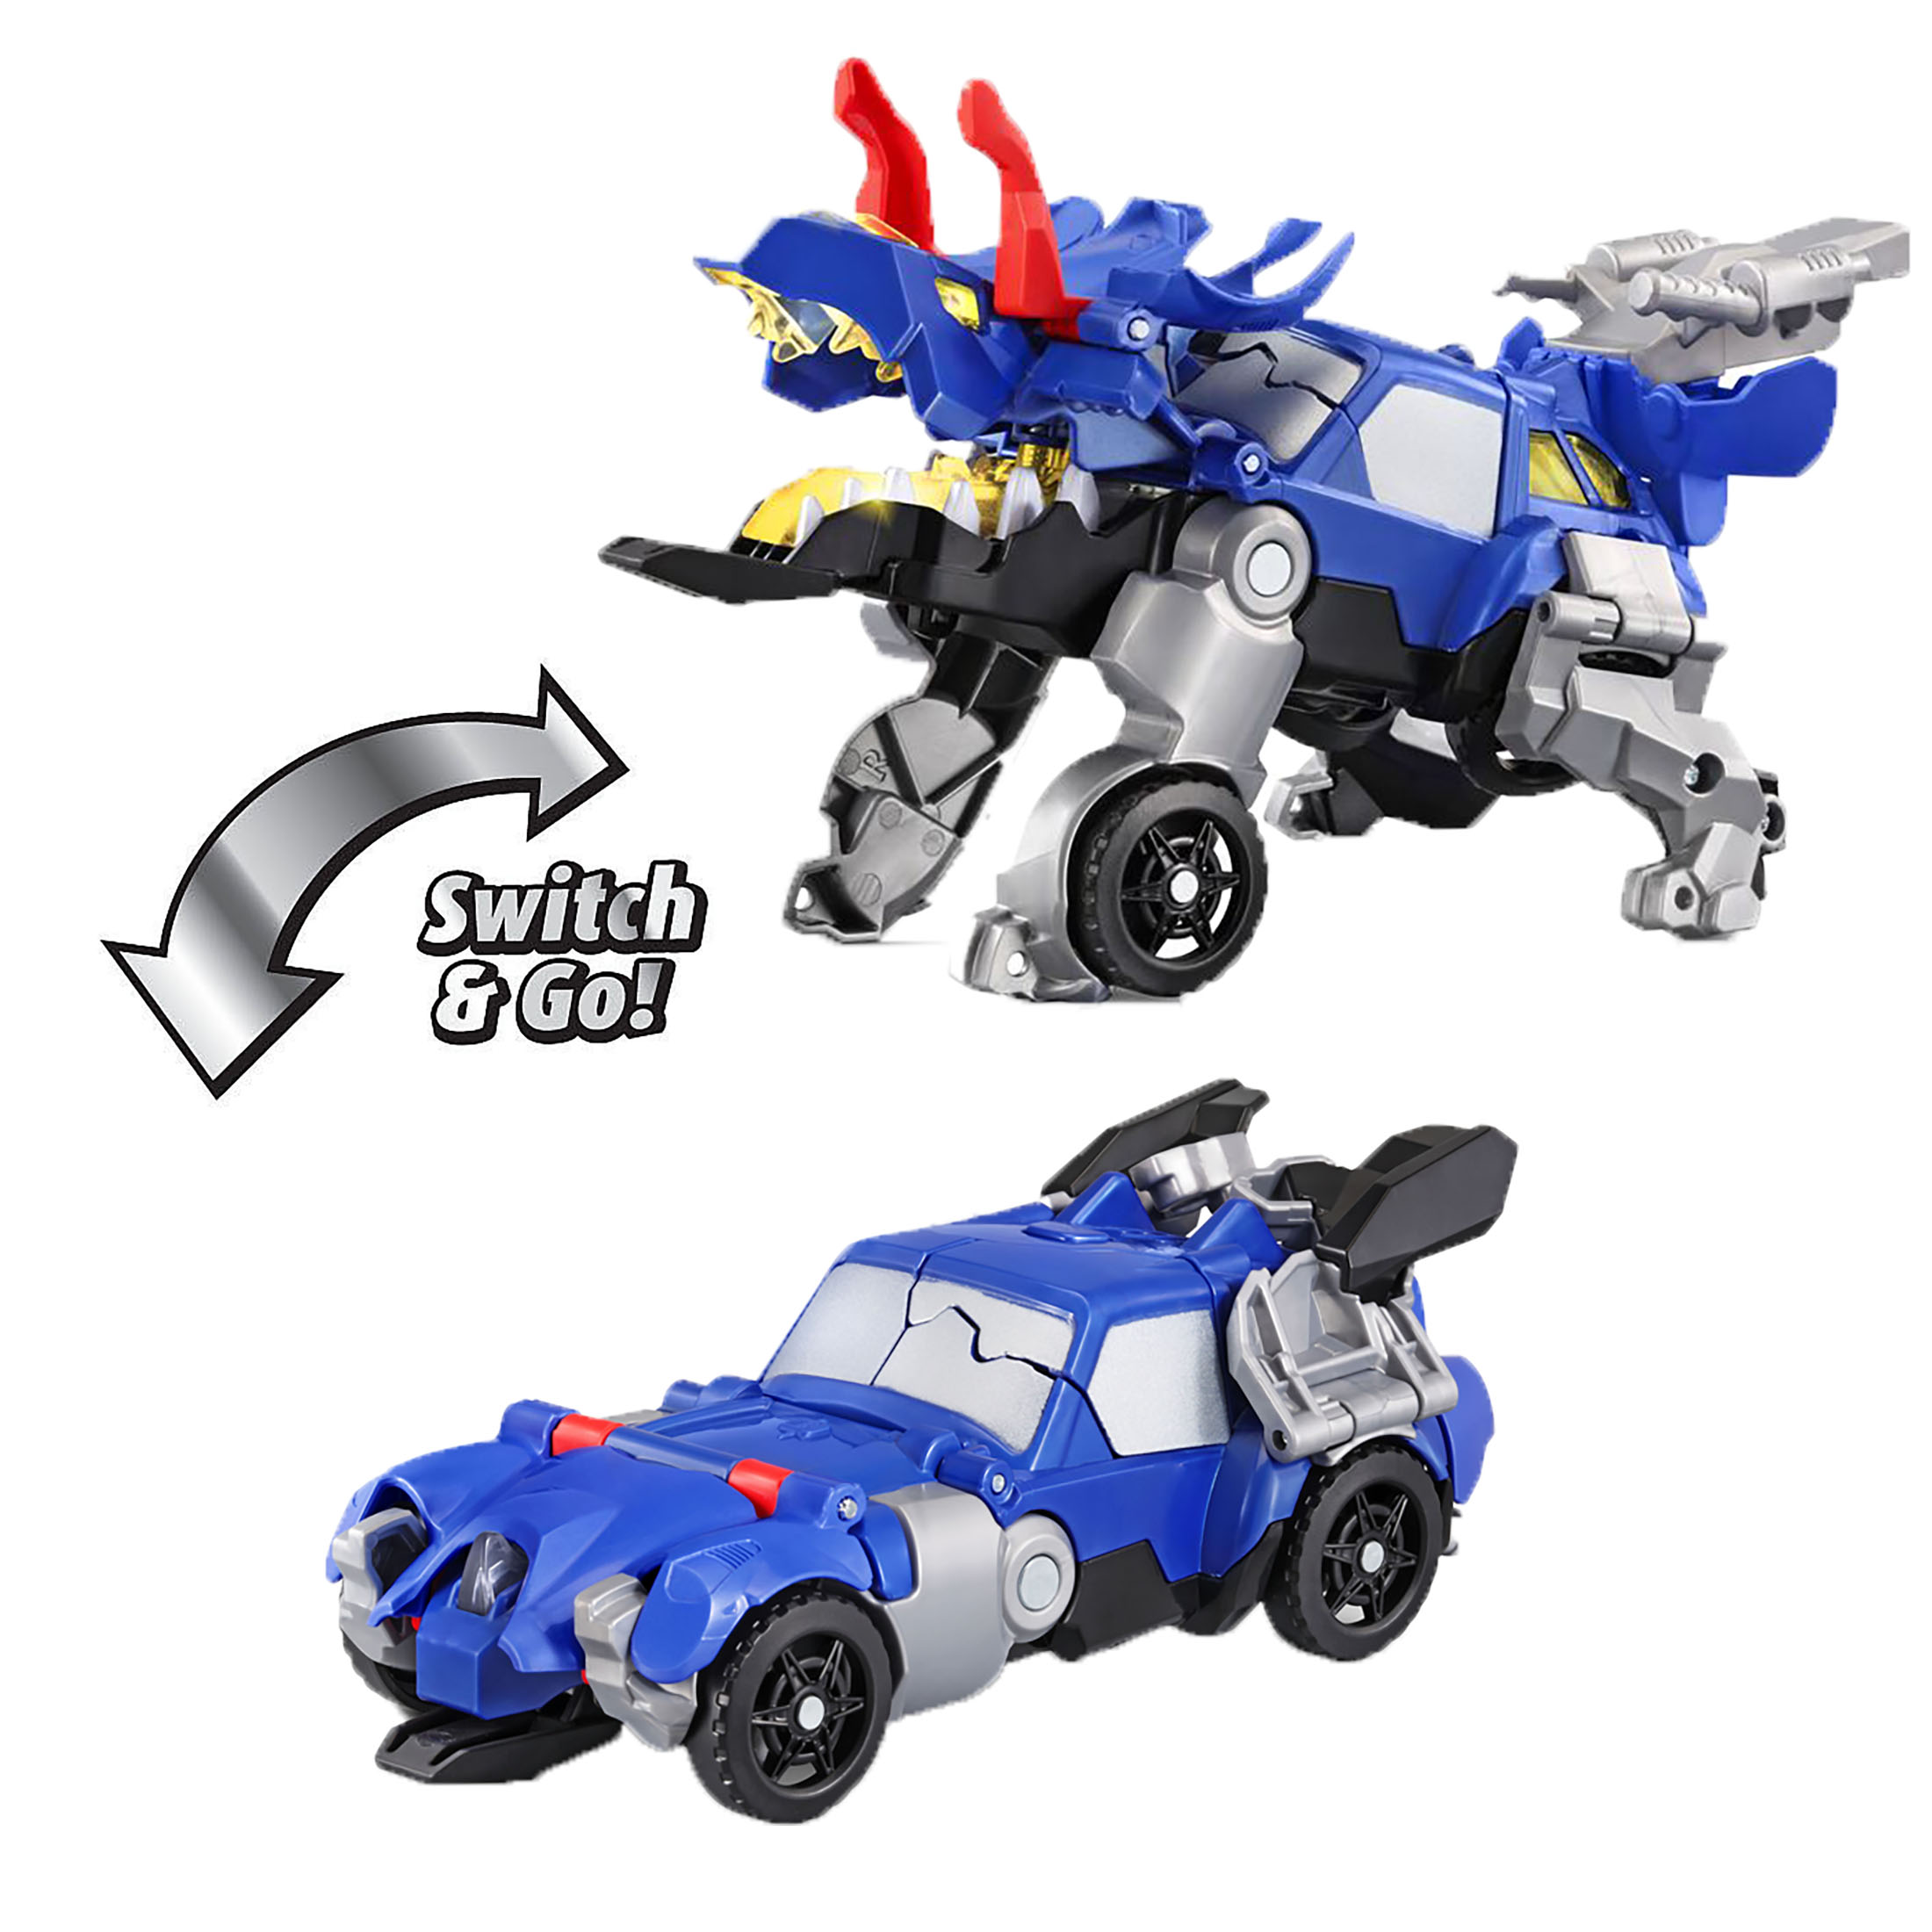 Transform playtime with a ferocious dino that can easily change into an awesome vehicle